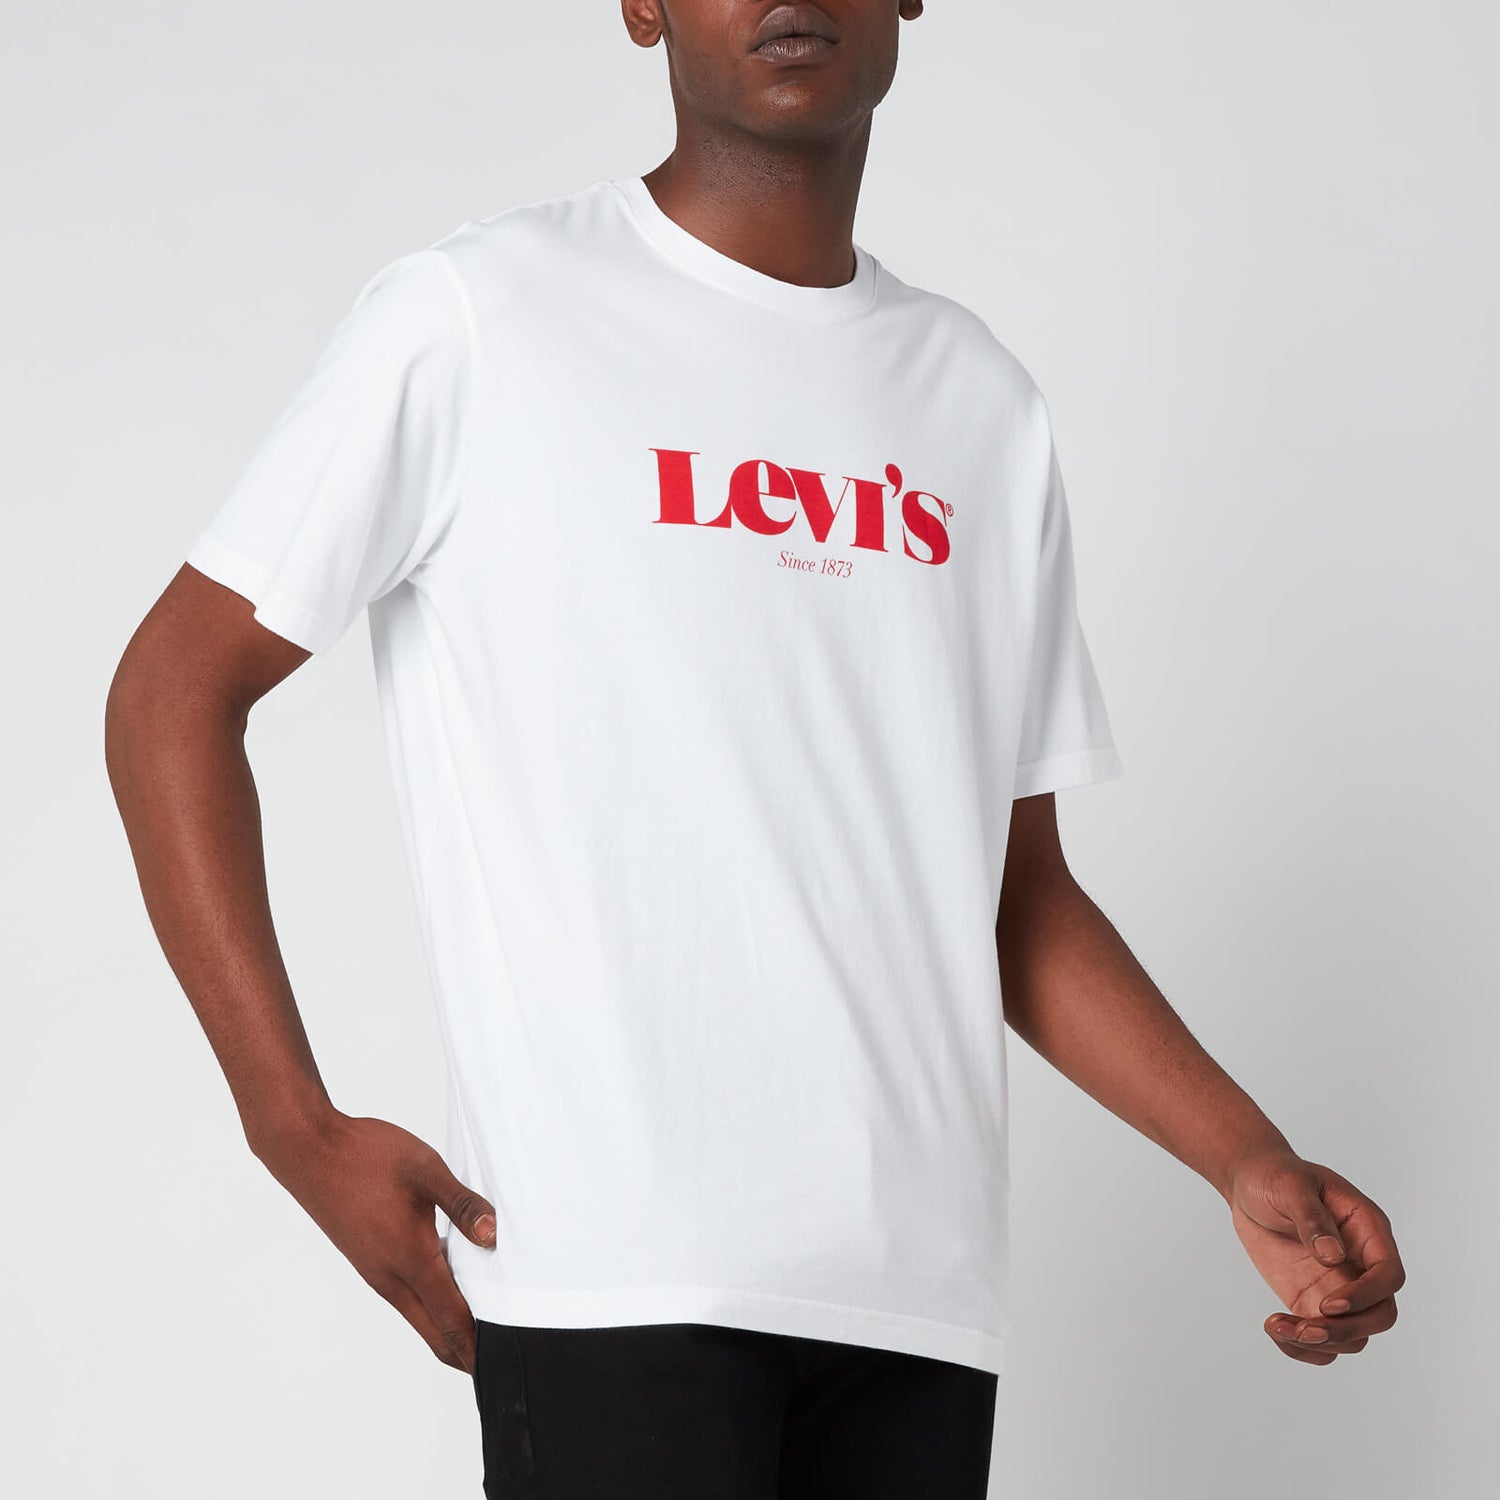 Levi's Men's Relaxed Fit T-Shirt - White